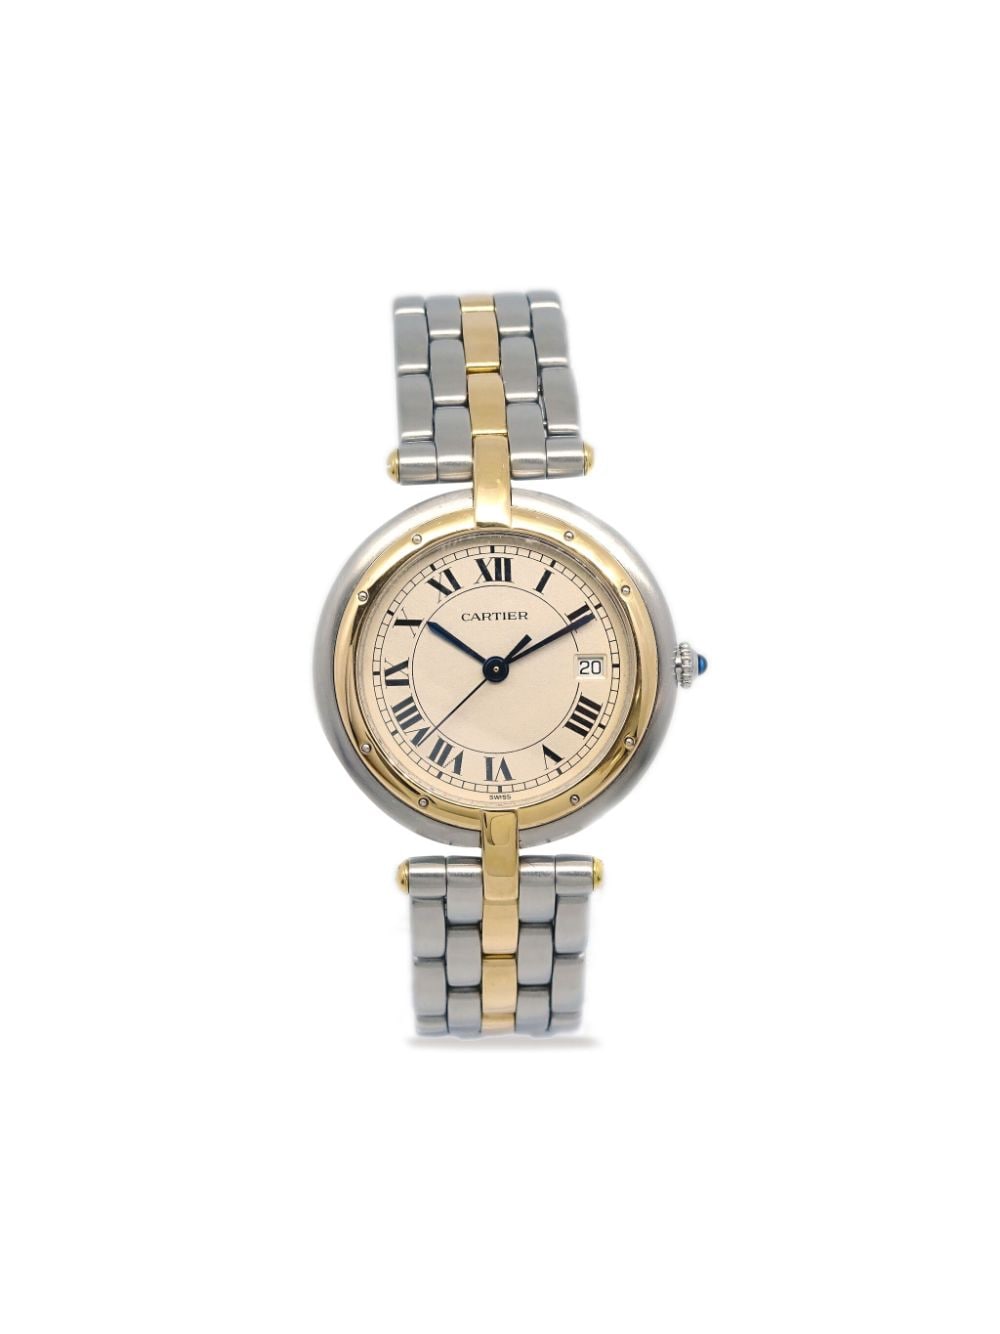 Pre-owned Cartier Panthère Vendome Mm 30毫米腕表（1980-1990年典藏款） In Gold